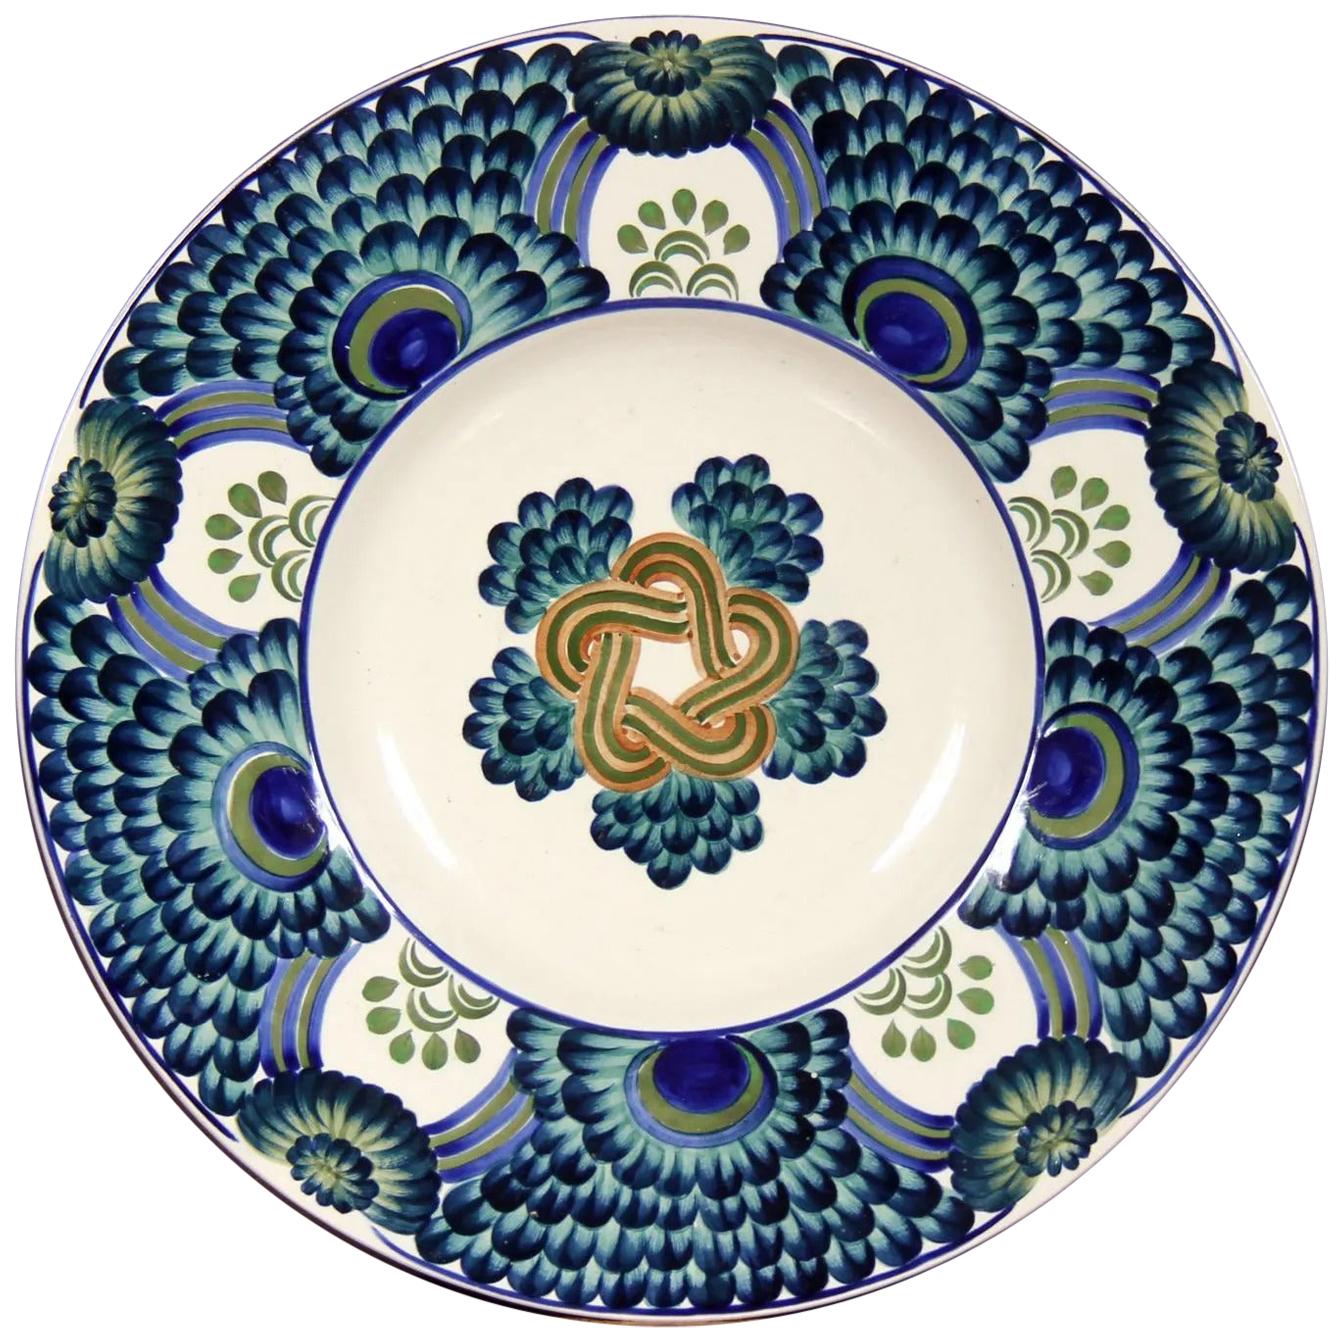 Aluminia Copenhagen, Hollow Dish with Polychrome Peacock Tail Decoration, Signed For Sale